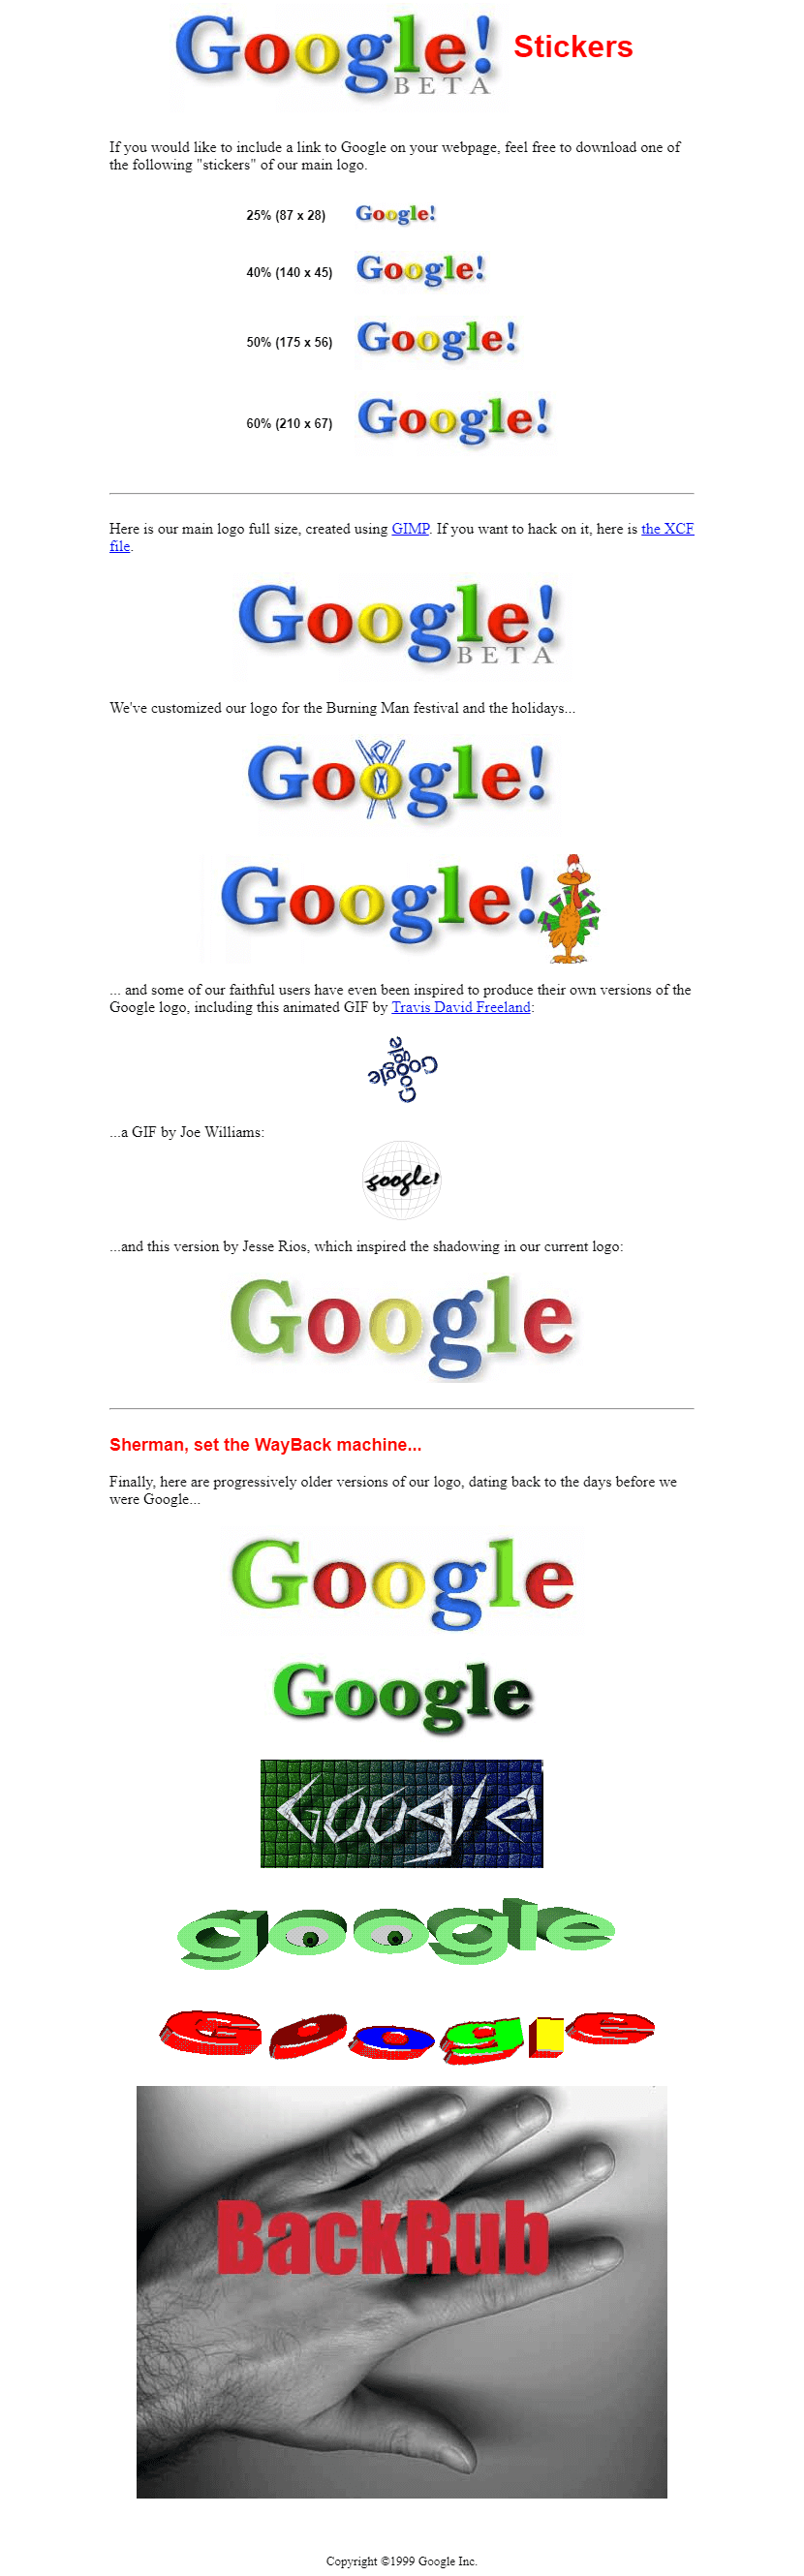 Google Stickers in 1999